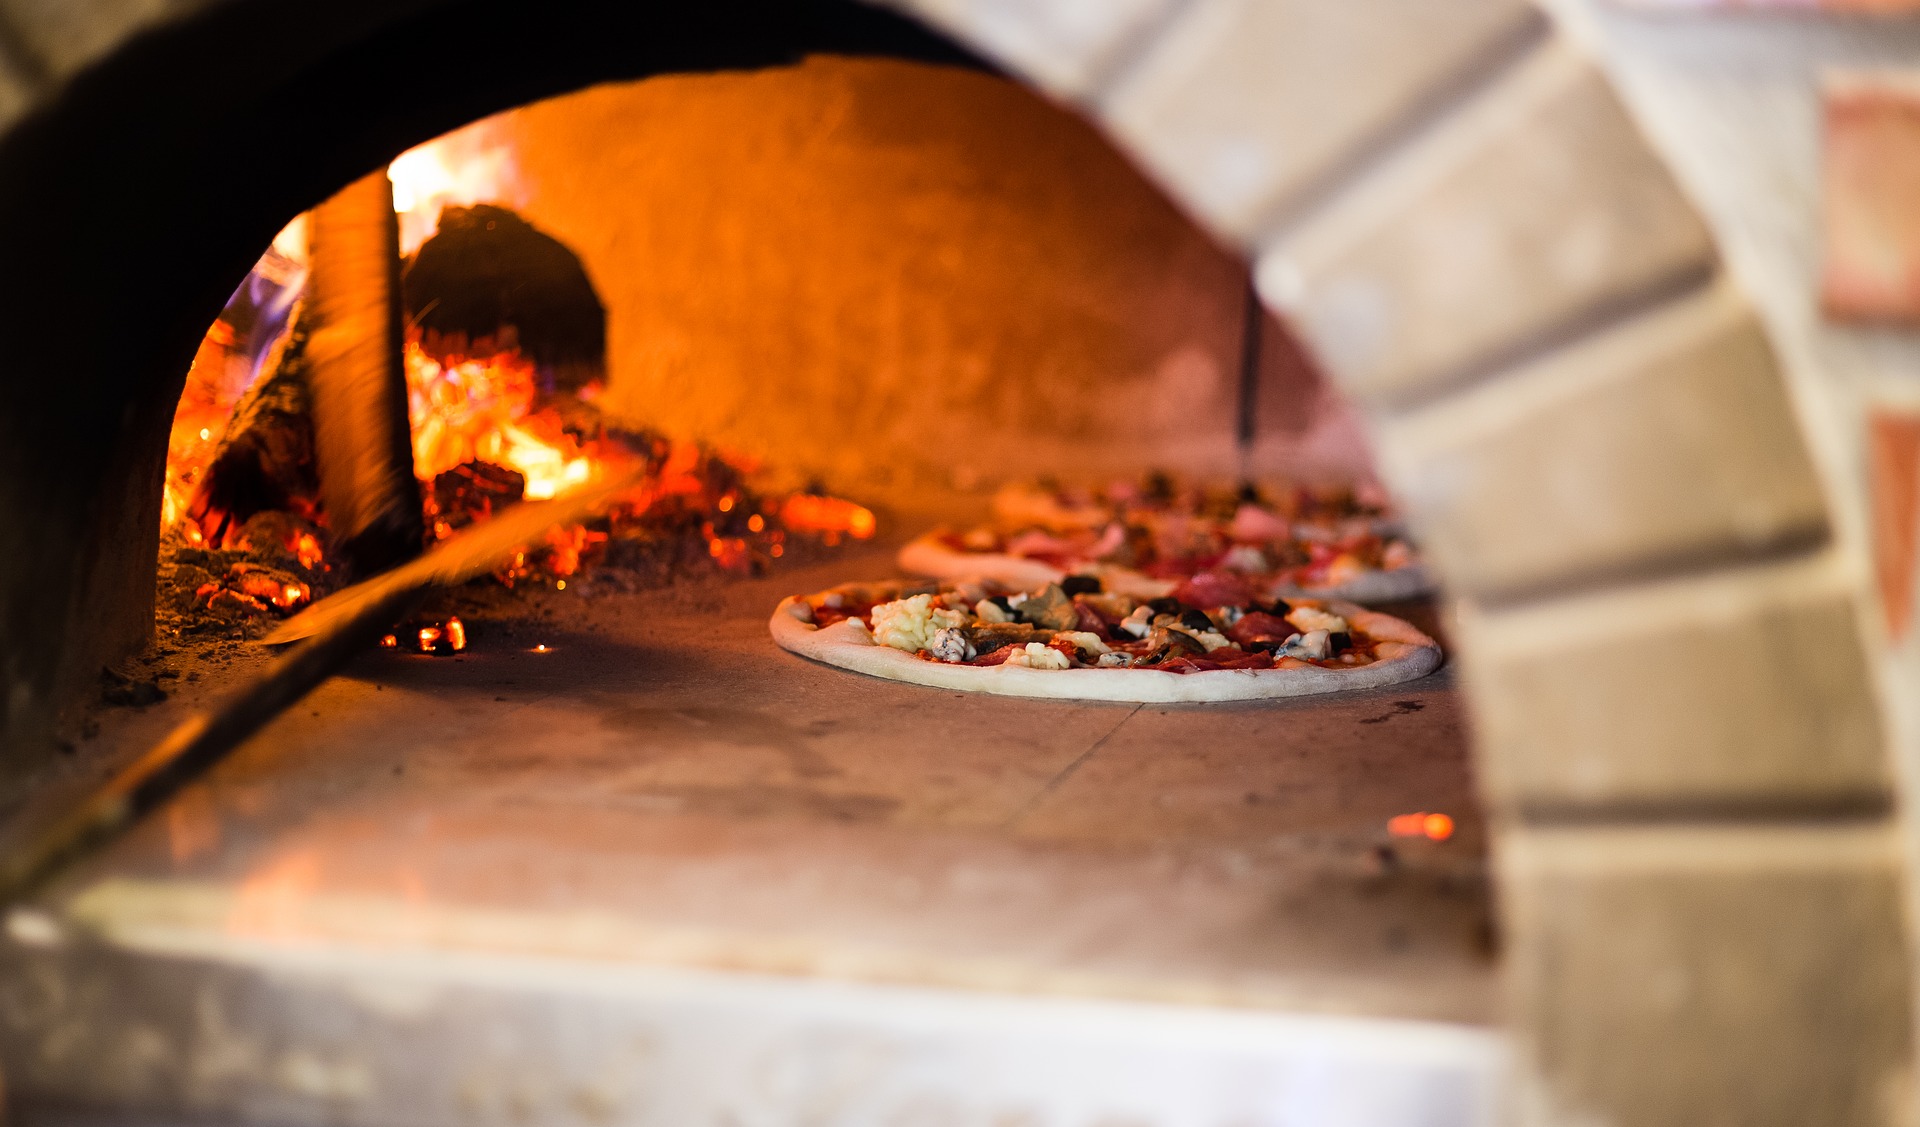 Winter Recipes for Your Pizza Oven